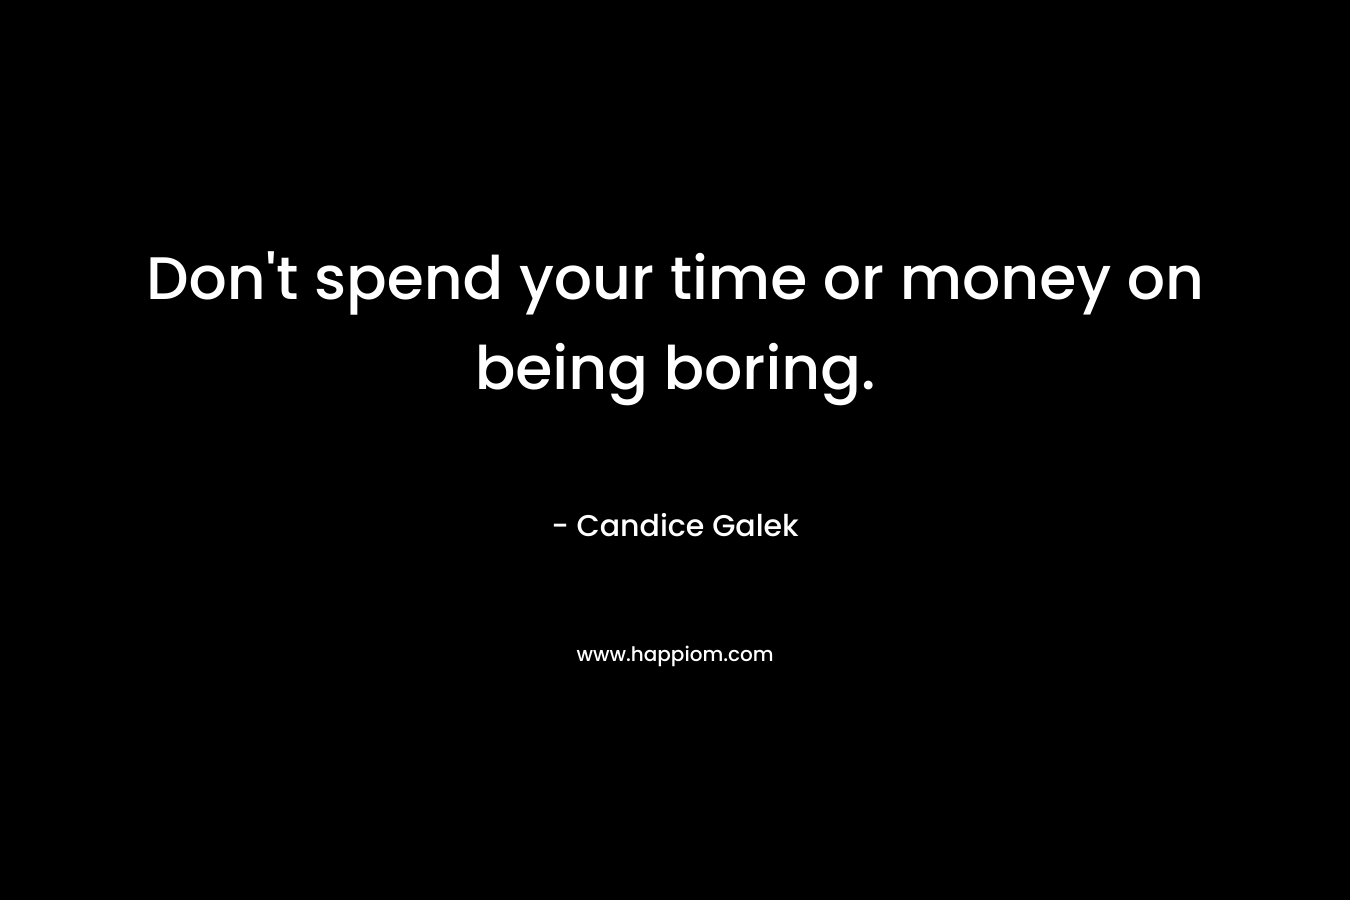 Don’t spend your time or money on being boring. – Candice Galek